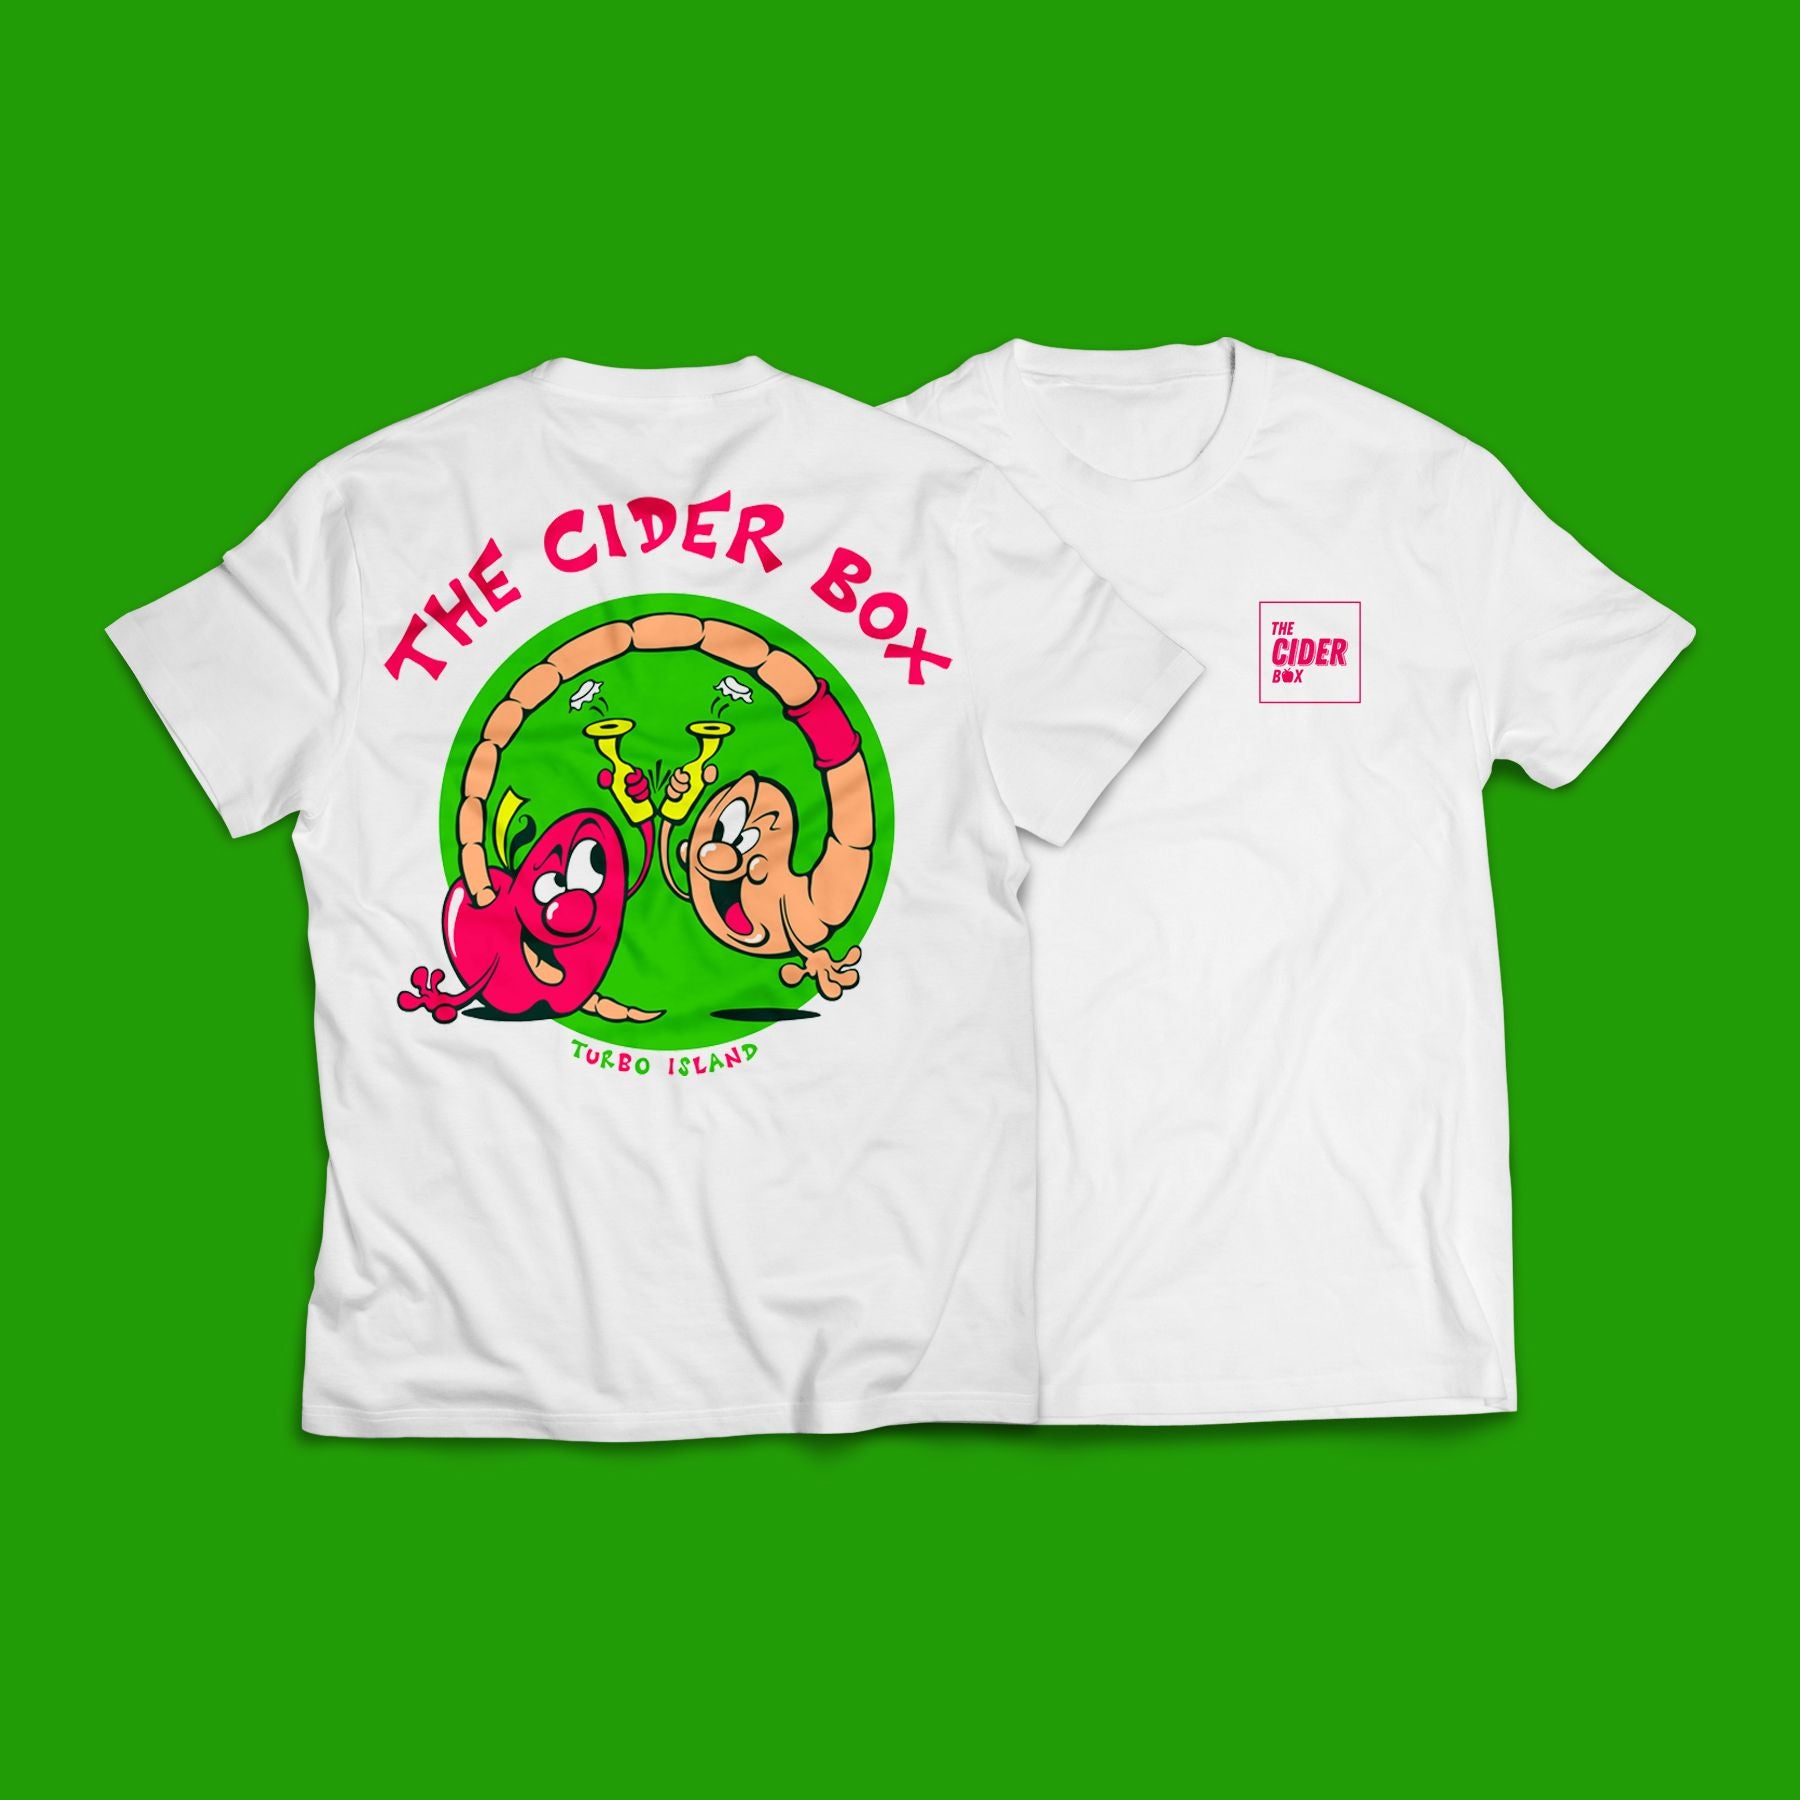 The Cider Box: Spring 2022 tee with Turbo Island